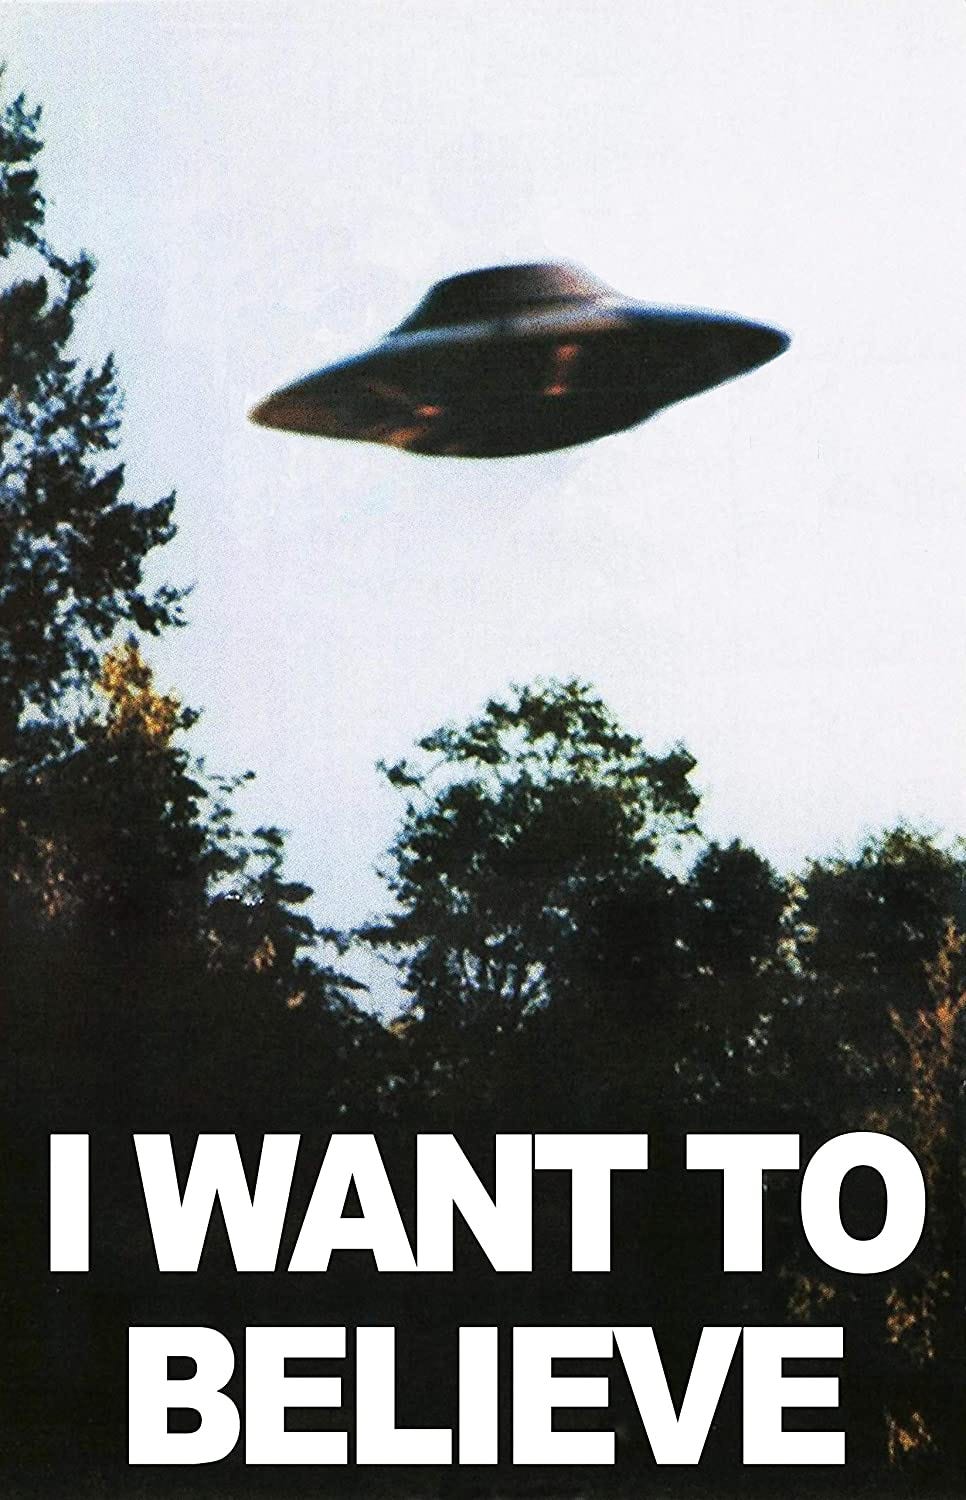 Amazon.com: X FILES &quot;I Want to Believe&quot; Mulders Office Tv Show Poster  24x36: Posters &amp; Prints